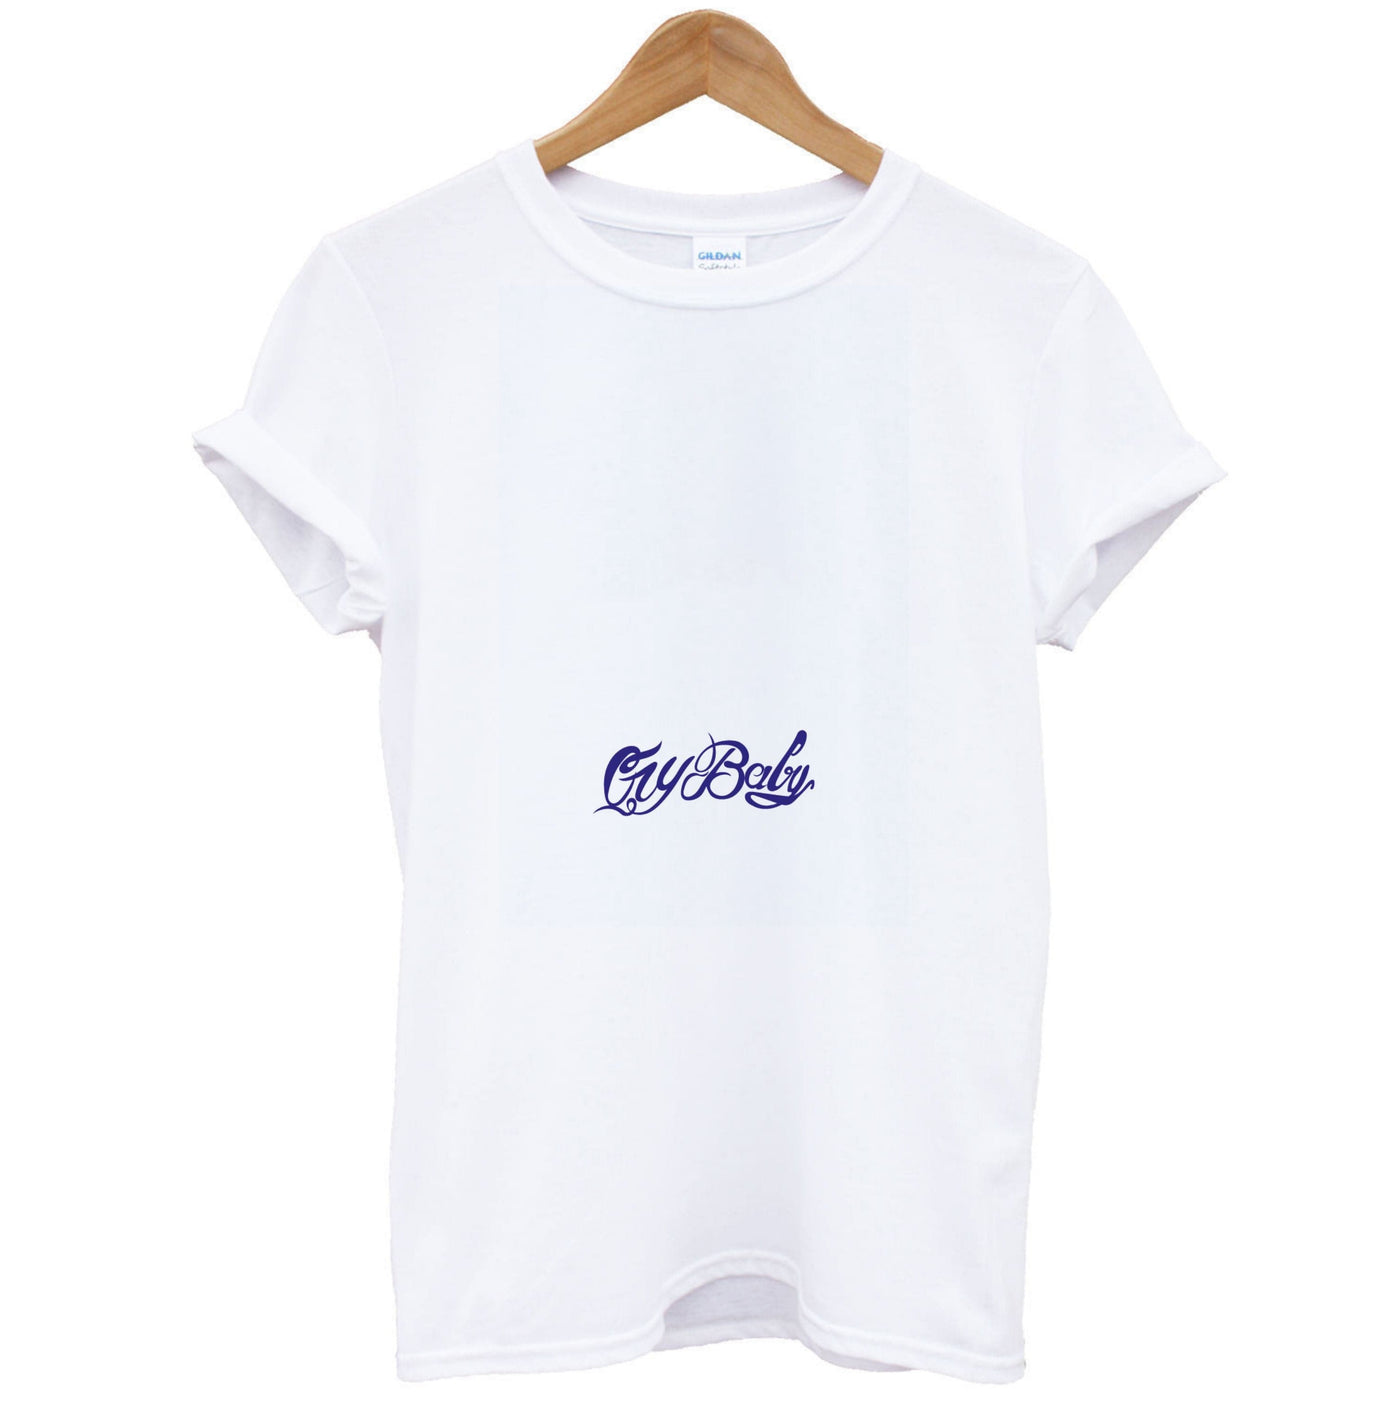 Cry Baby - Lil Peep T-Shirt